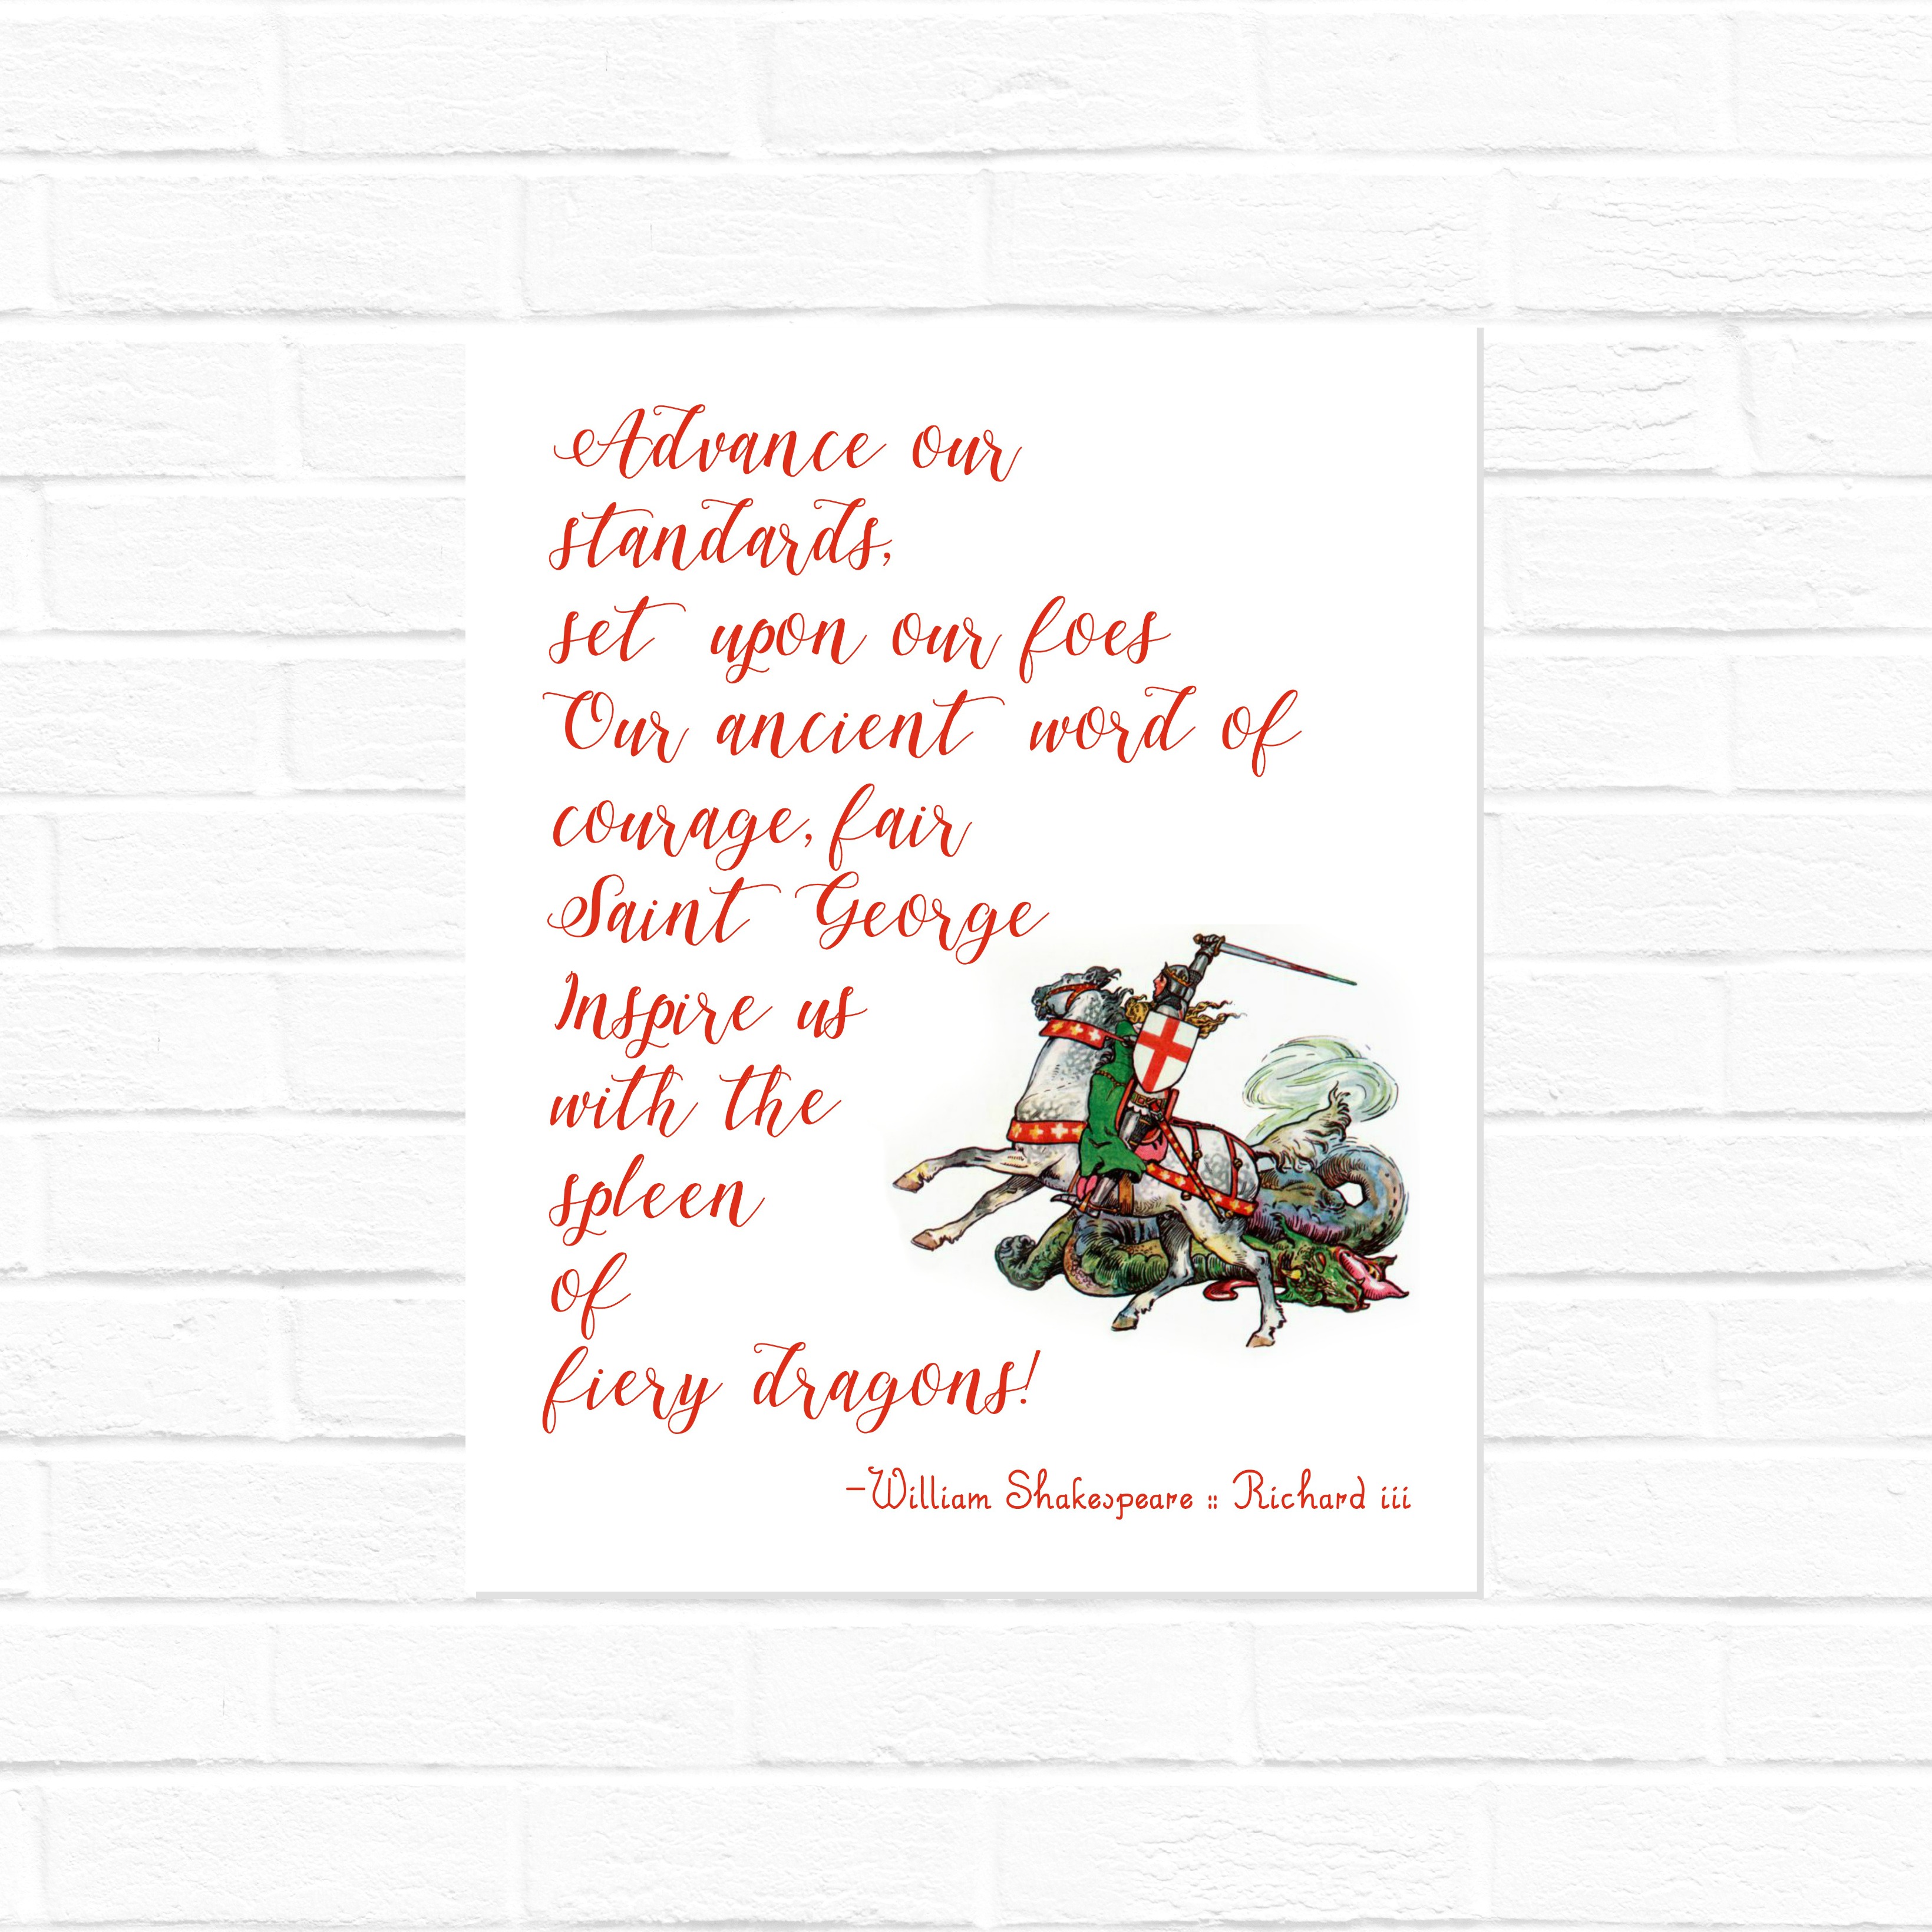 St George quote  from Shakespeare s  Richard  III  digital 